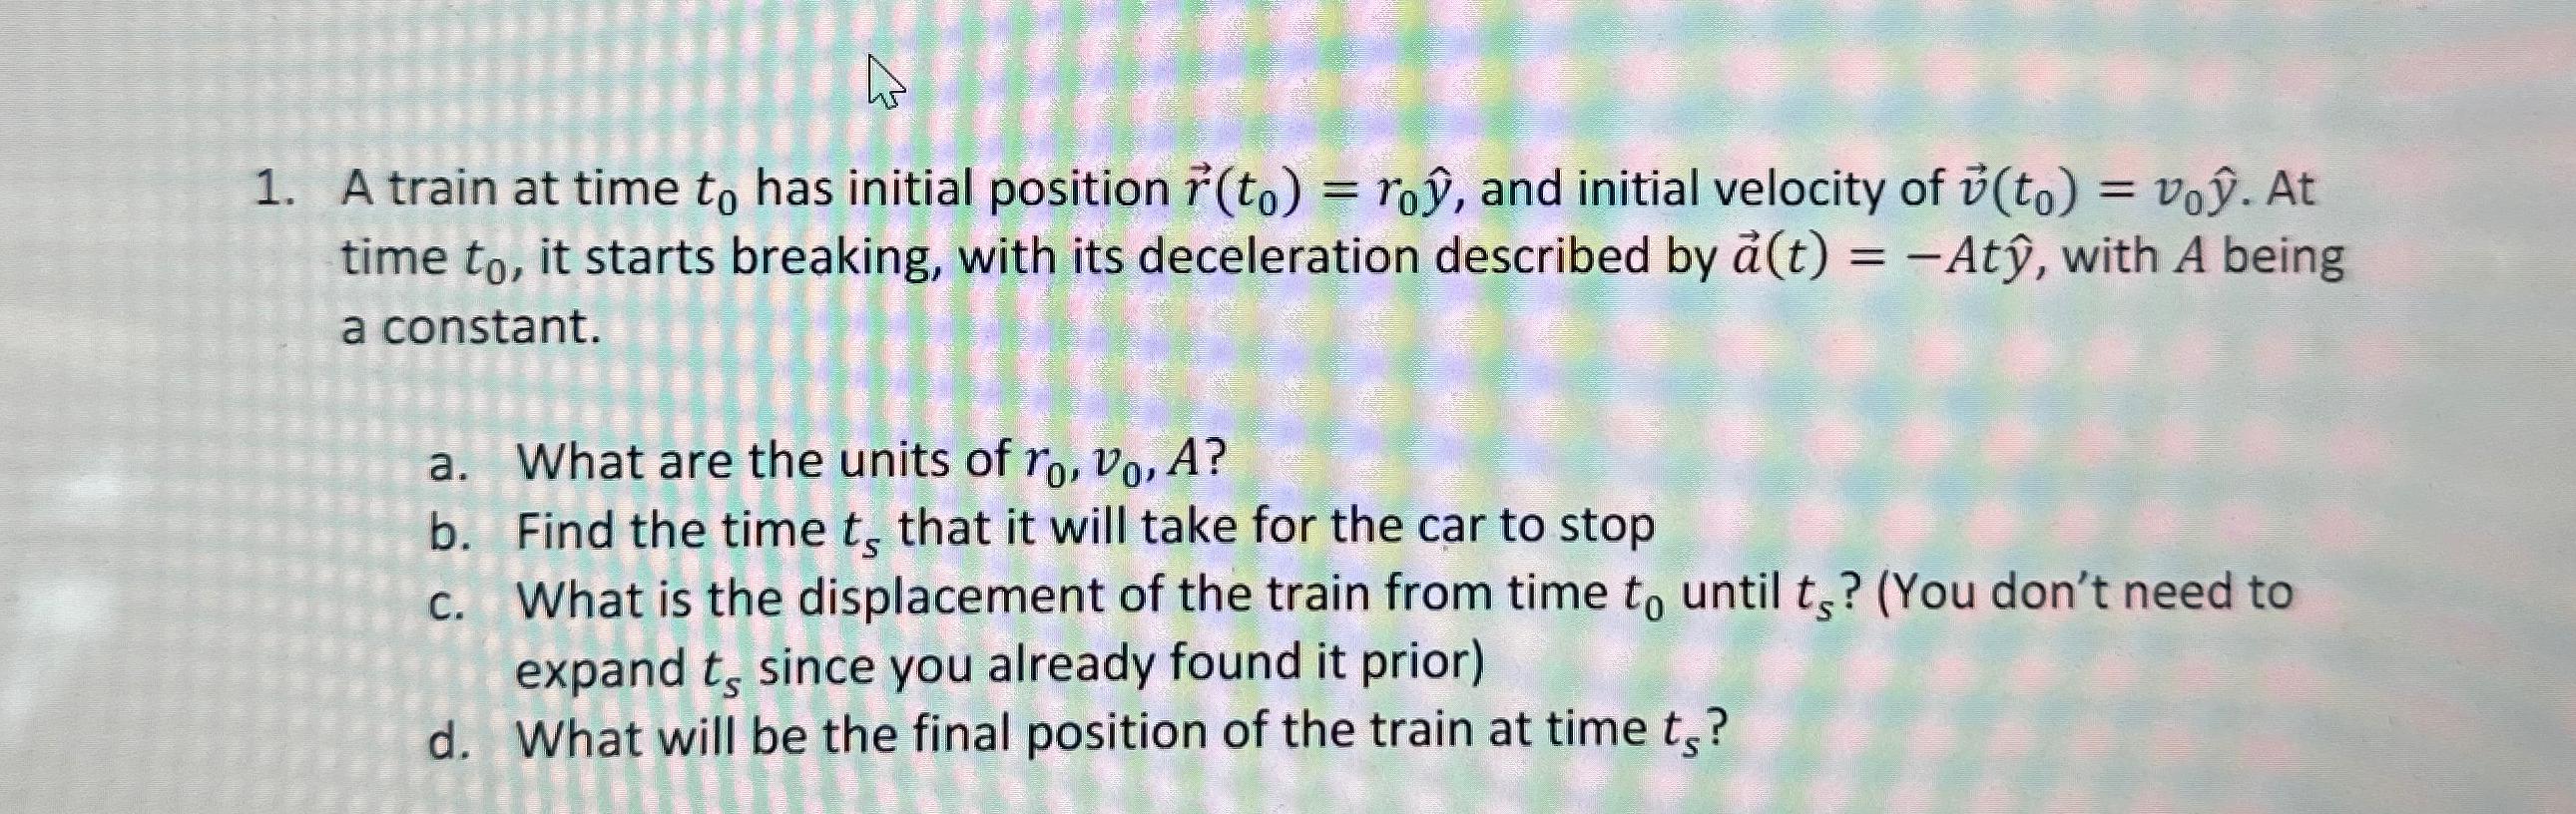 A 1. A train at time to has initial position r(to) = ro, and initial velocity of v(to) = vo. At time to, it